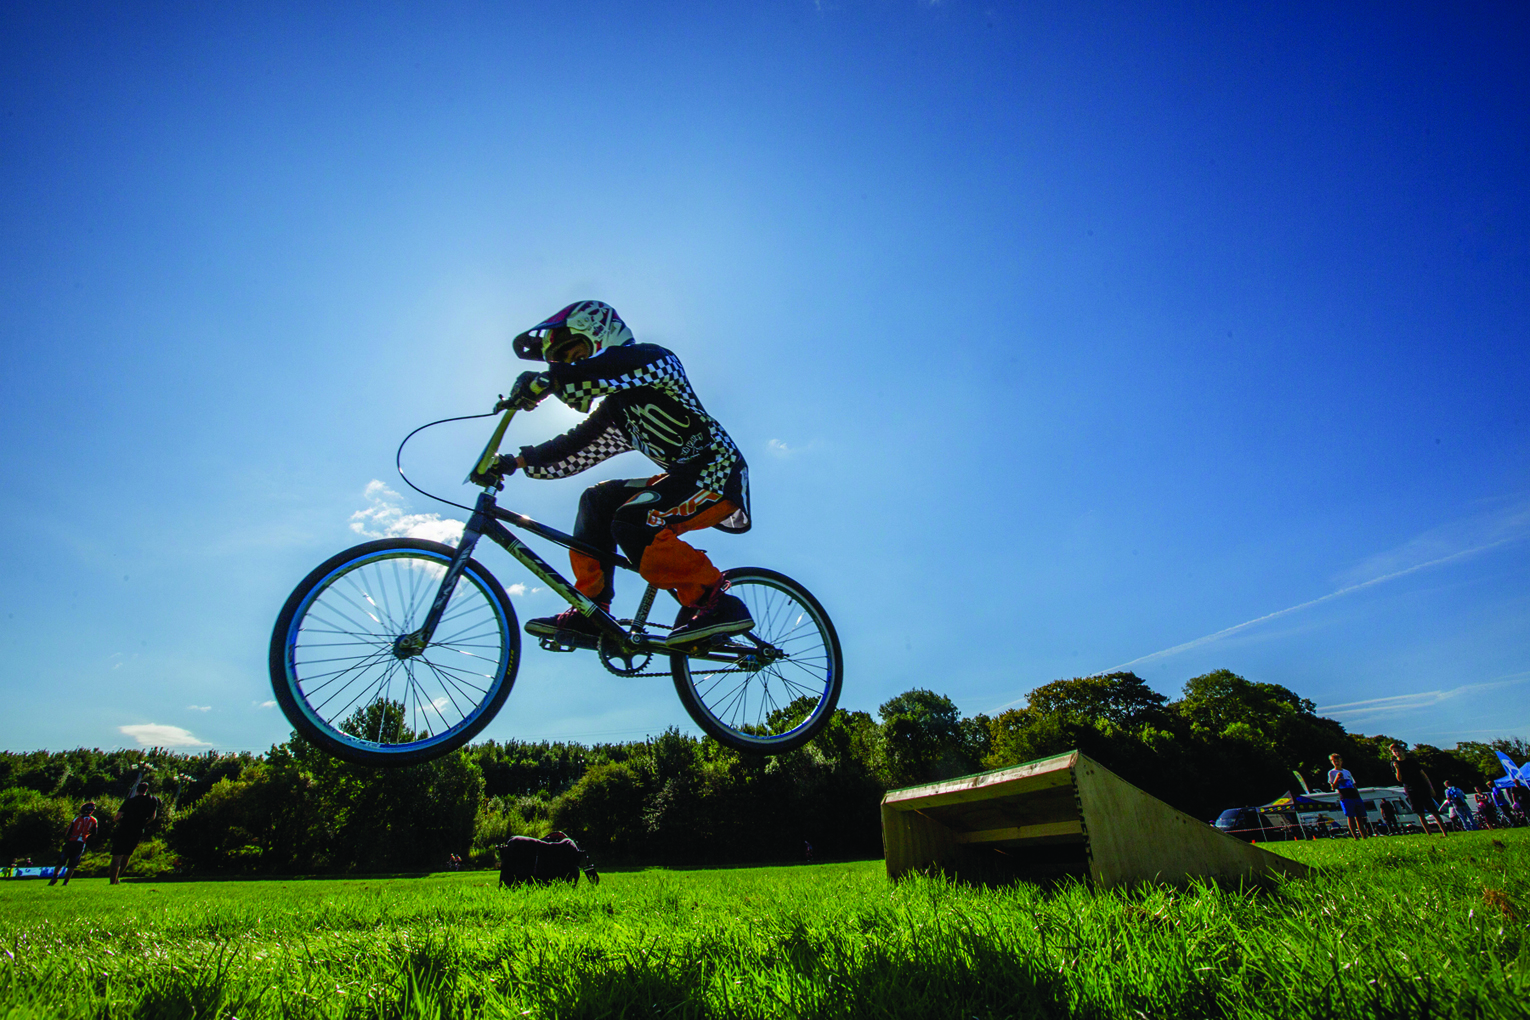 Join us for a week of cycling fun in Pendle